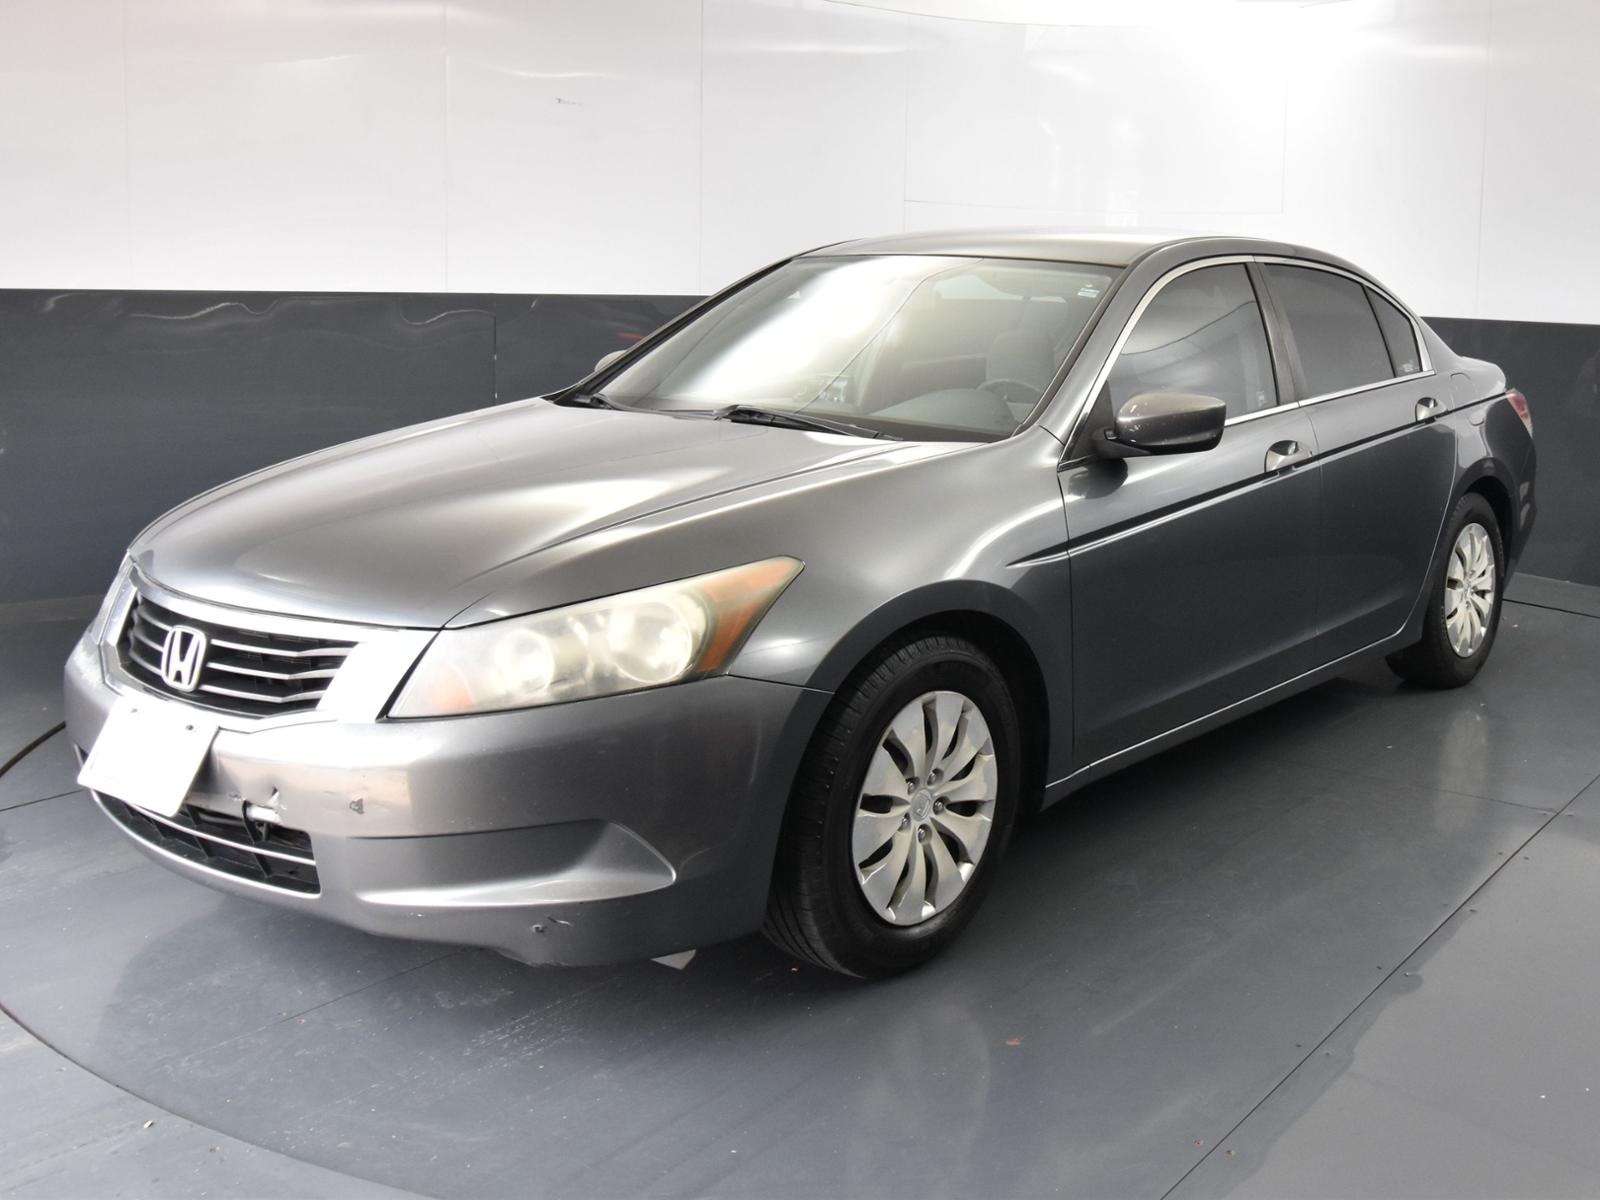 Pre-Owned 2009 Honda Accord 4dr I4 Auto LX 4dr Car in Houston #9A163262 |  Sterling McCall Hyundai